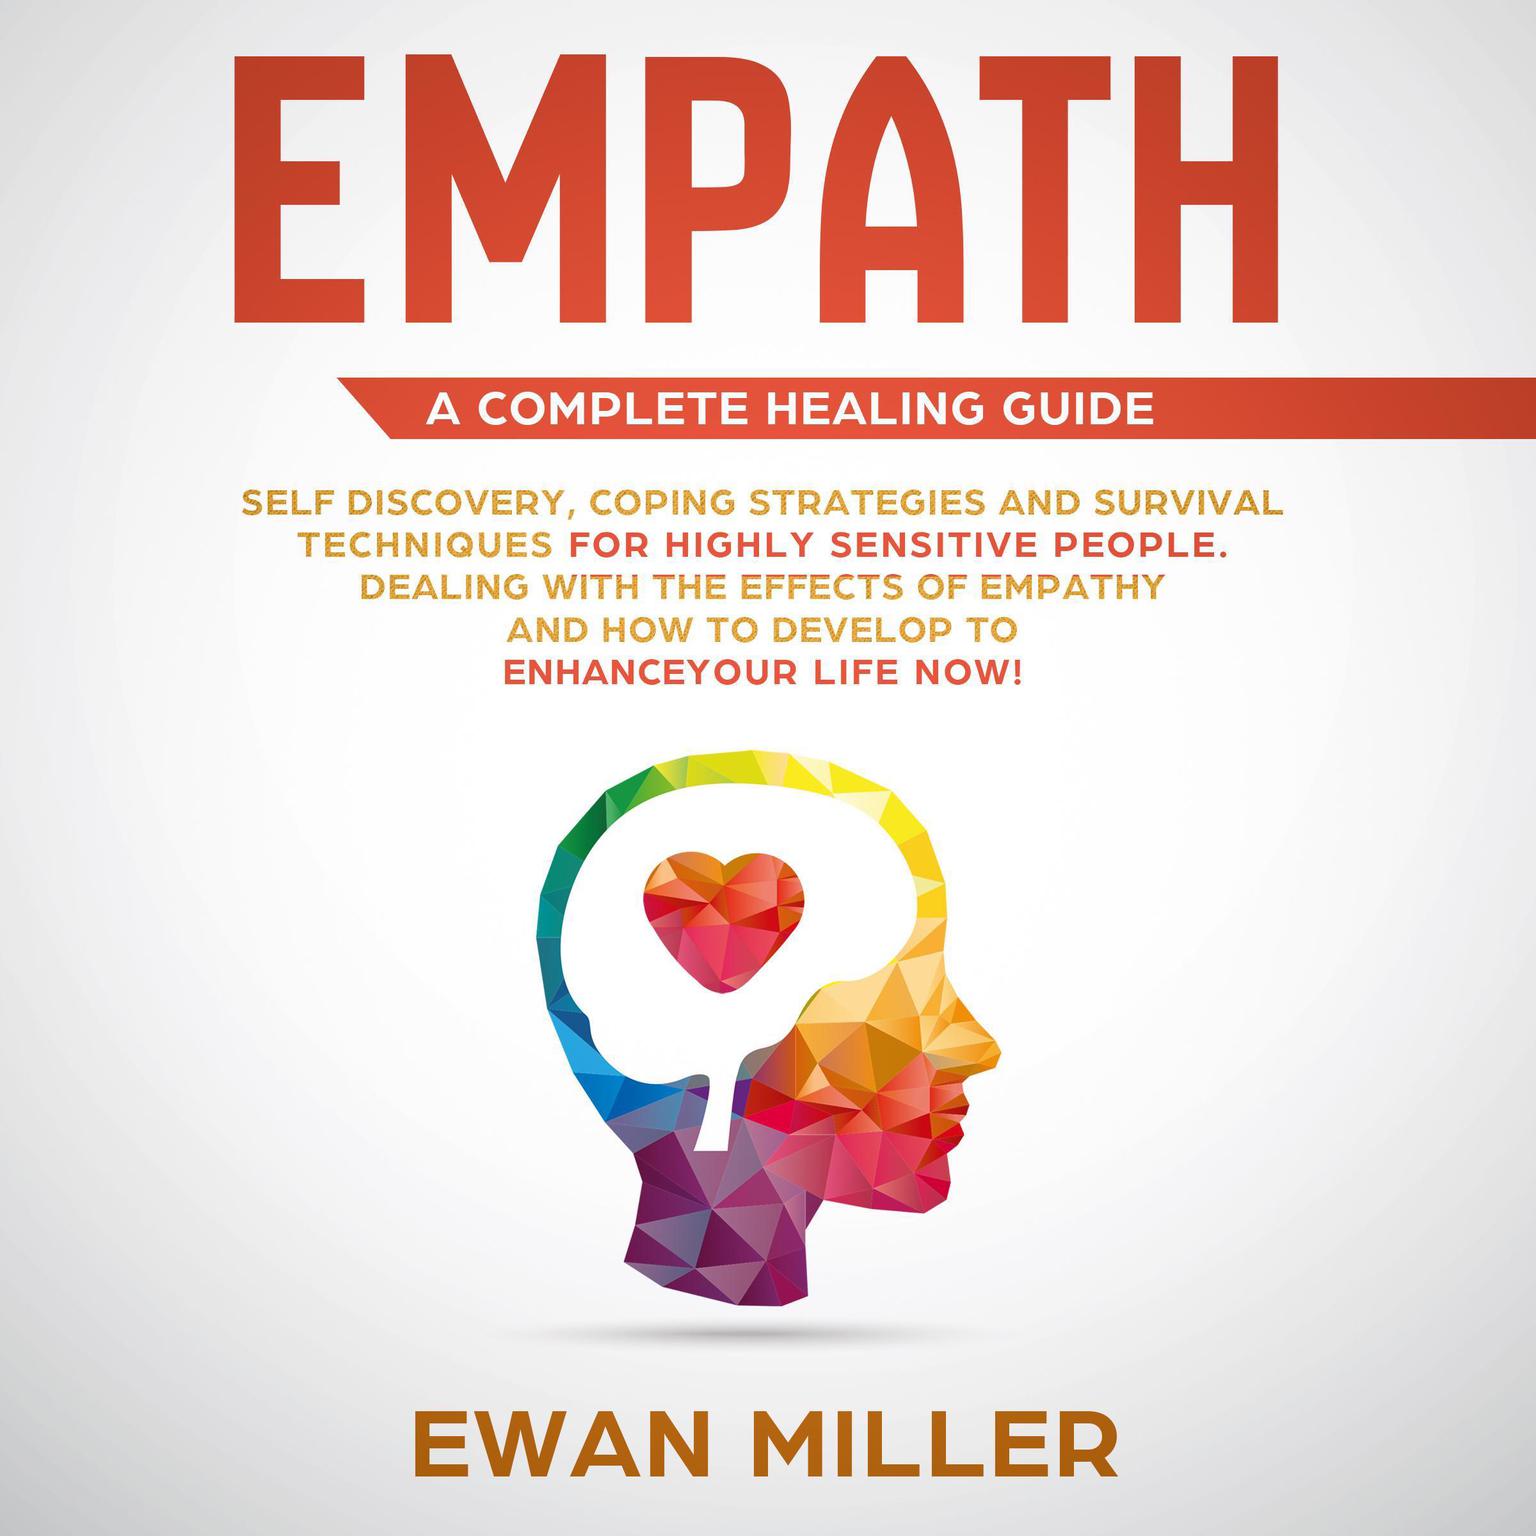 Empath – A Complete Healing Guide: Self-Discovery, Coping Strategies, Survival Techniques for Highly Sensitive People. Dealing with the Effects of Empathy and how to develop to Enhance Your Life NOW! Audiobook, by Ewan Miller